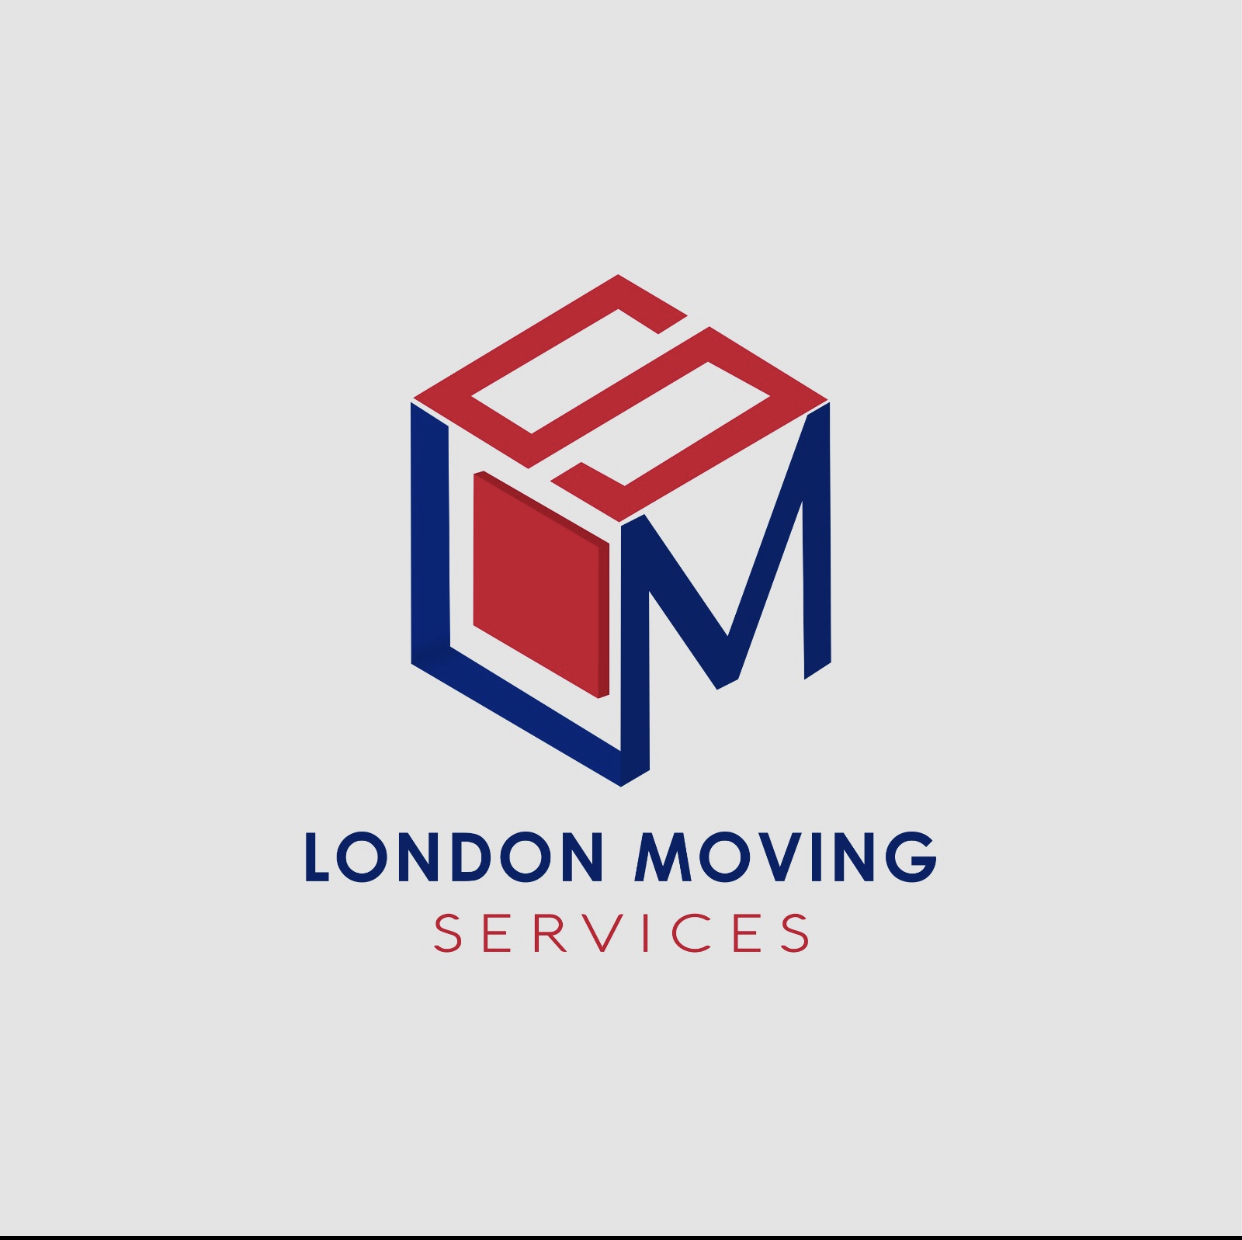 London Moving services